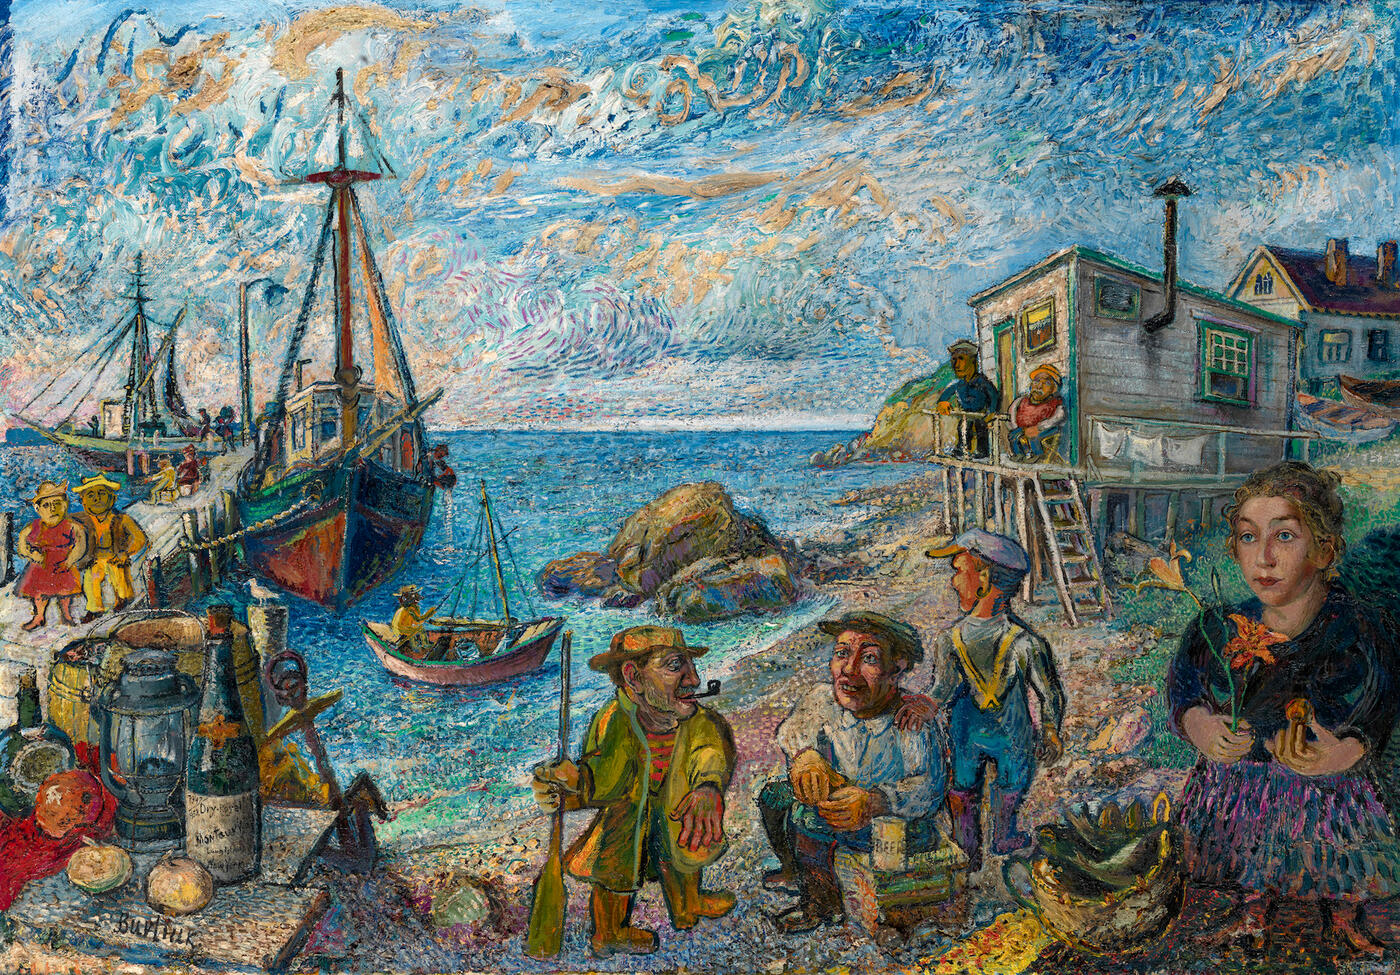 Fishermen and the Artist's Wife on the Long Island's Shore